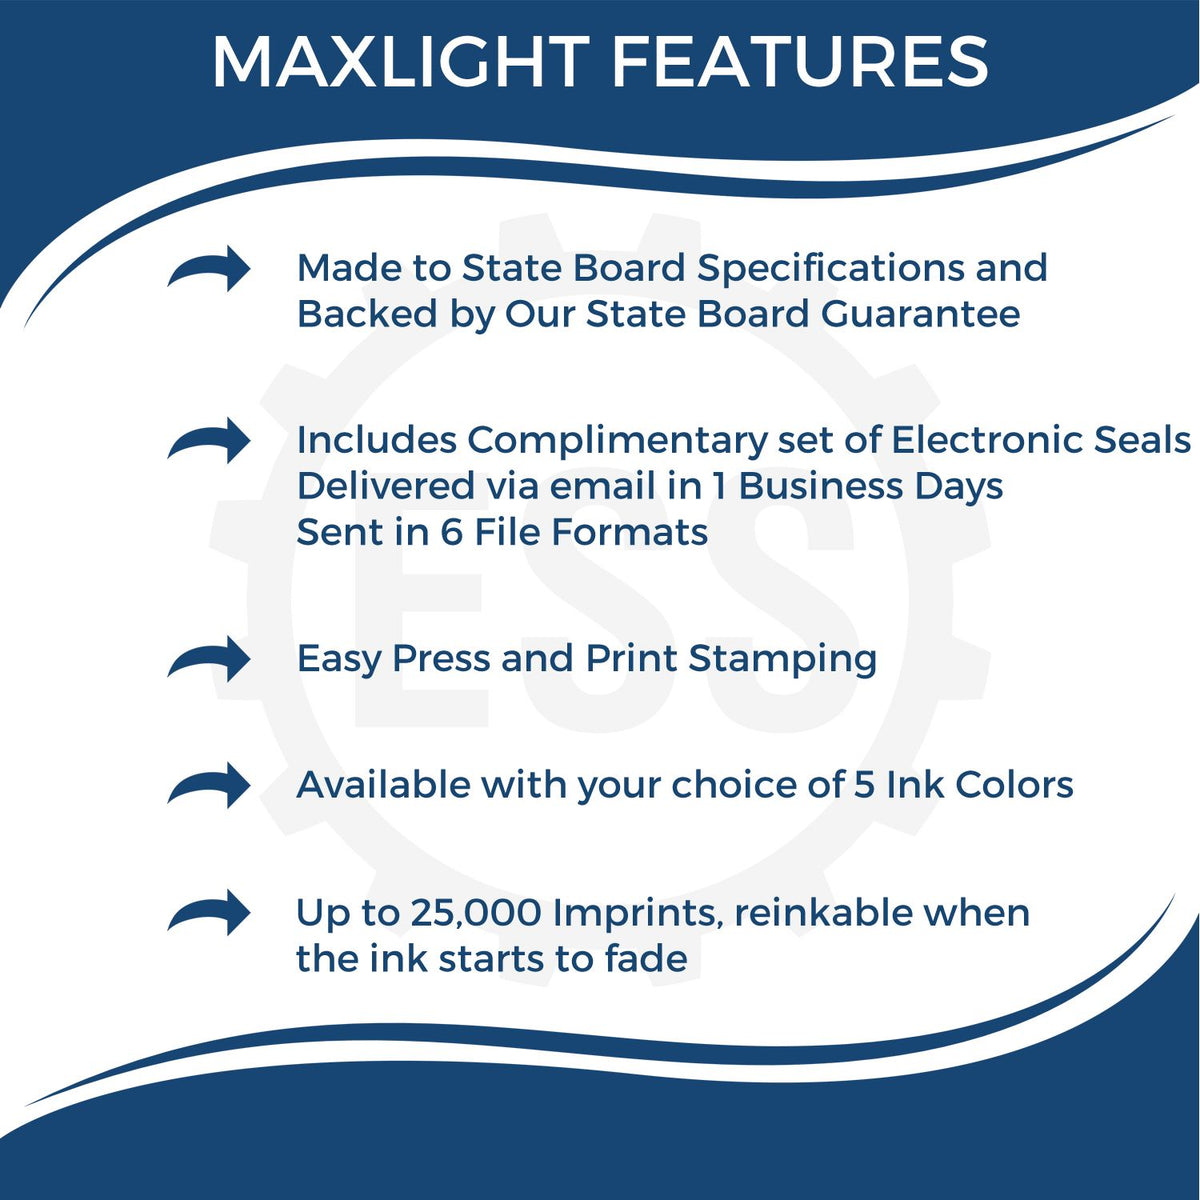 A picture of an infographic highlighting the selling points for the MaxLight Premium Pre-Inked West Virginia State Seal Notarial Stamp